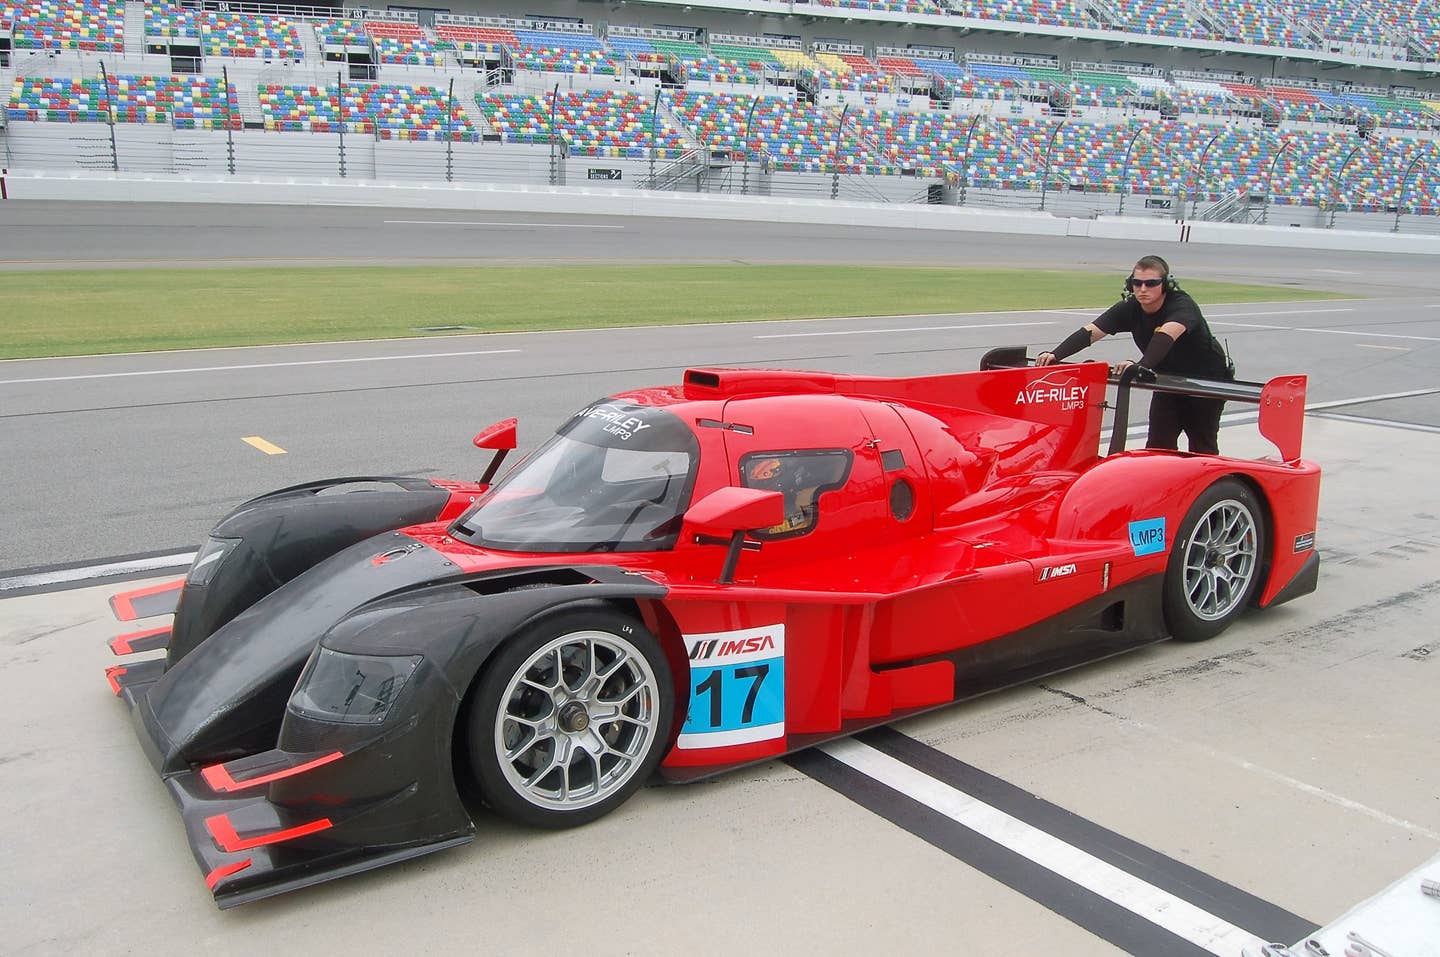 Here’s a Look at the New Ave-Riley AR2 LMP3 on Track